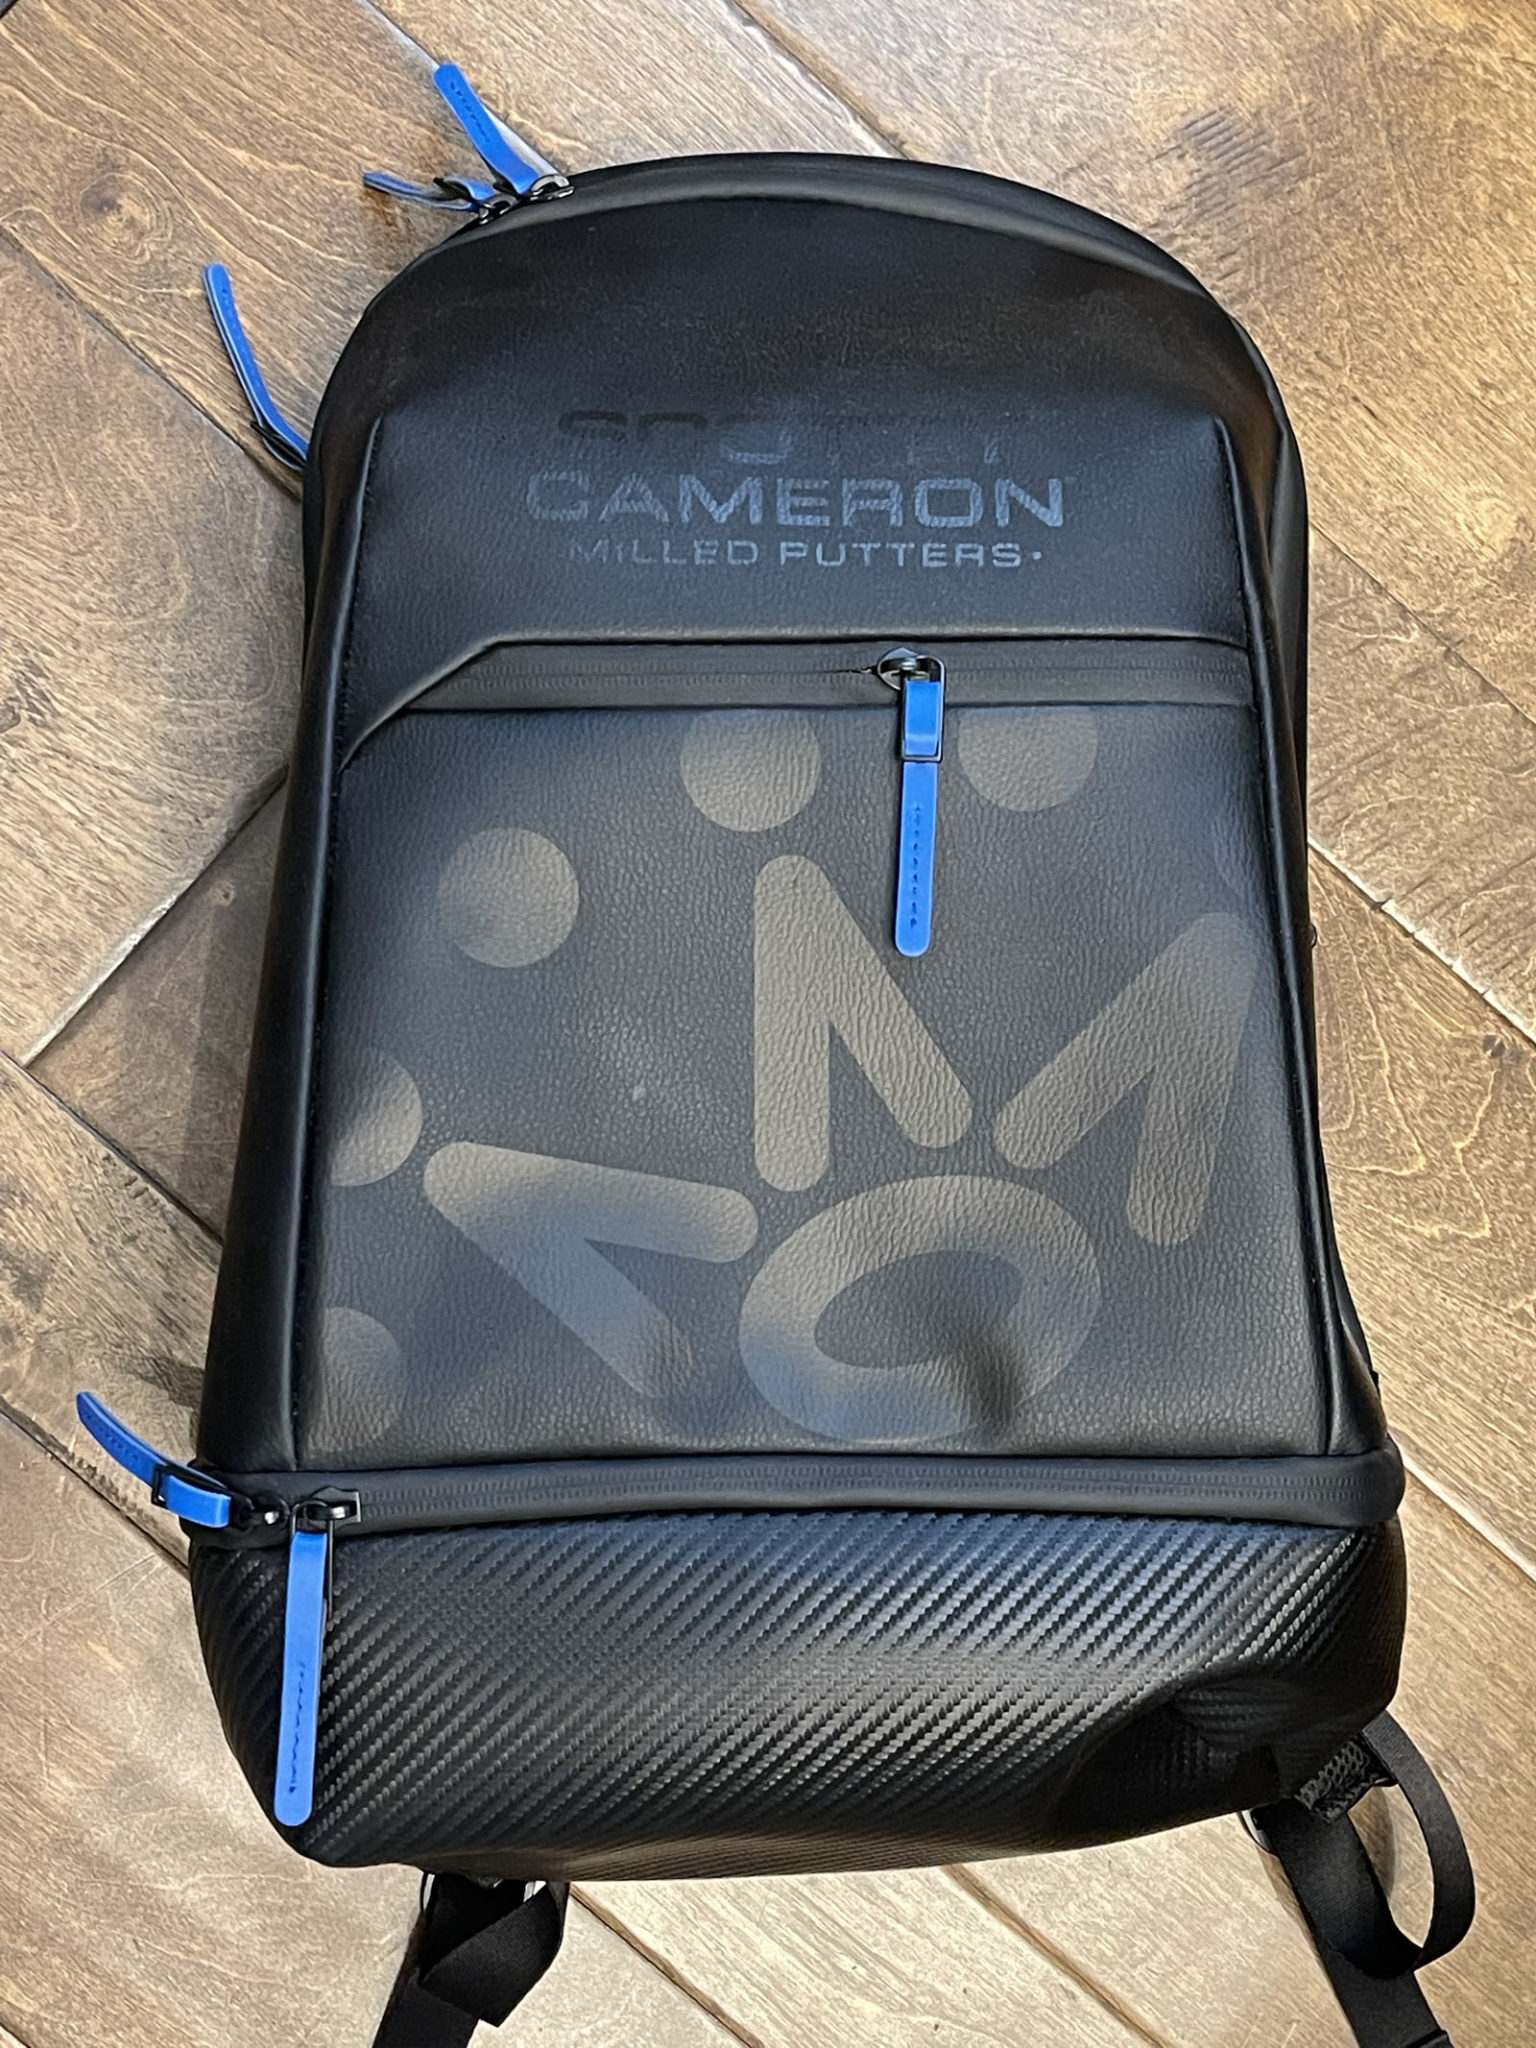 Scotty Cameron 2019 Club Cameron Member Black Leather Backpack by